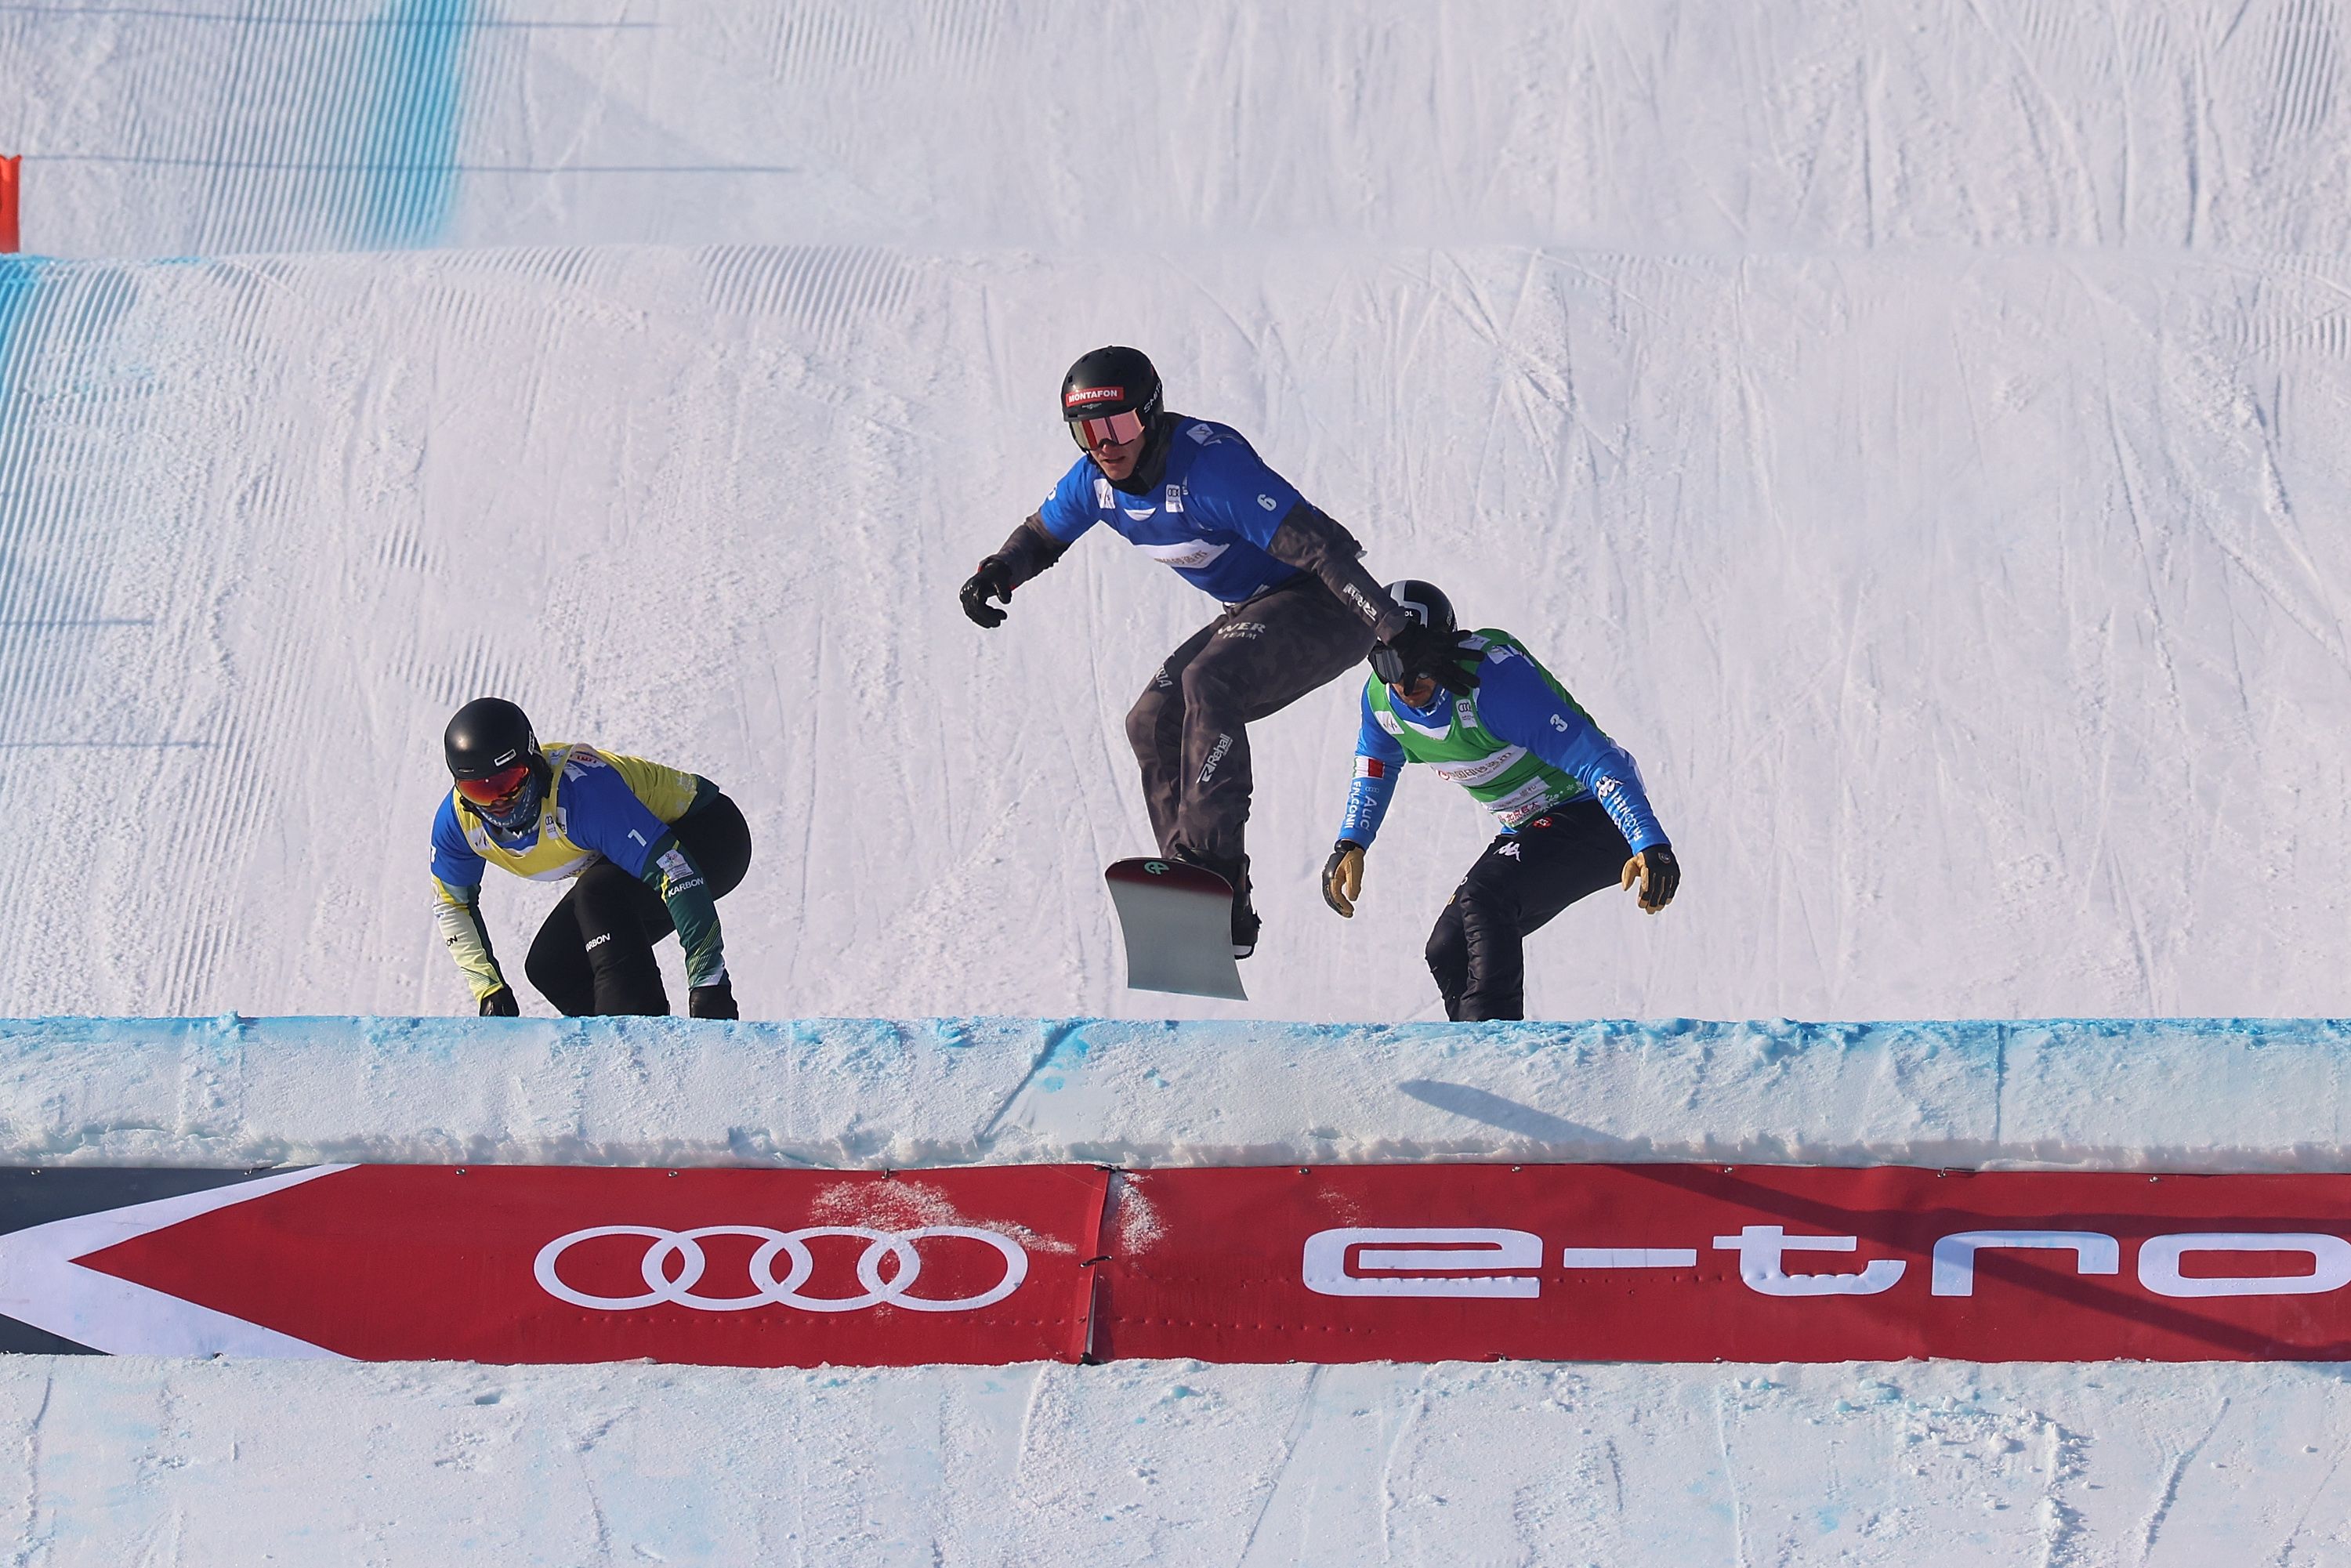 Adam Lambert of Austria , Mick Dierdorff of the United States and Martin Noerl of Germany compete in the Men's Snowboard Cross